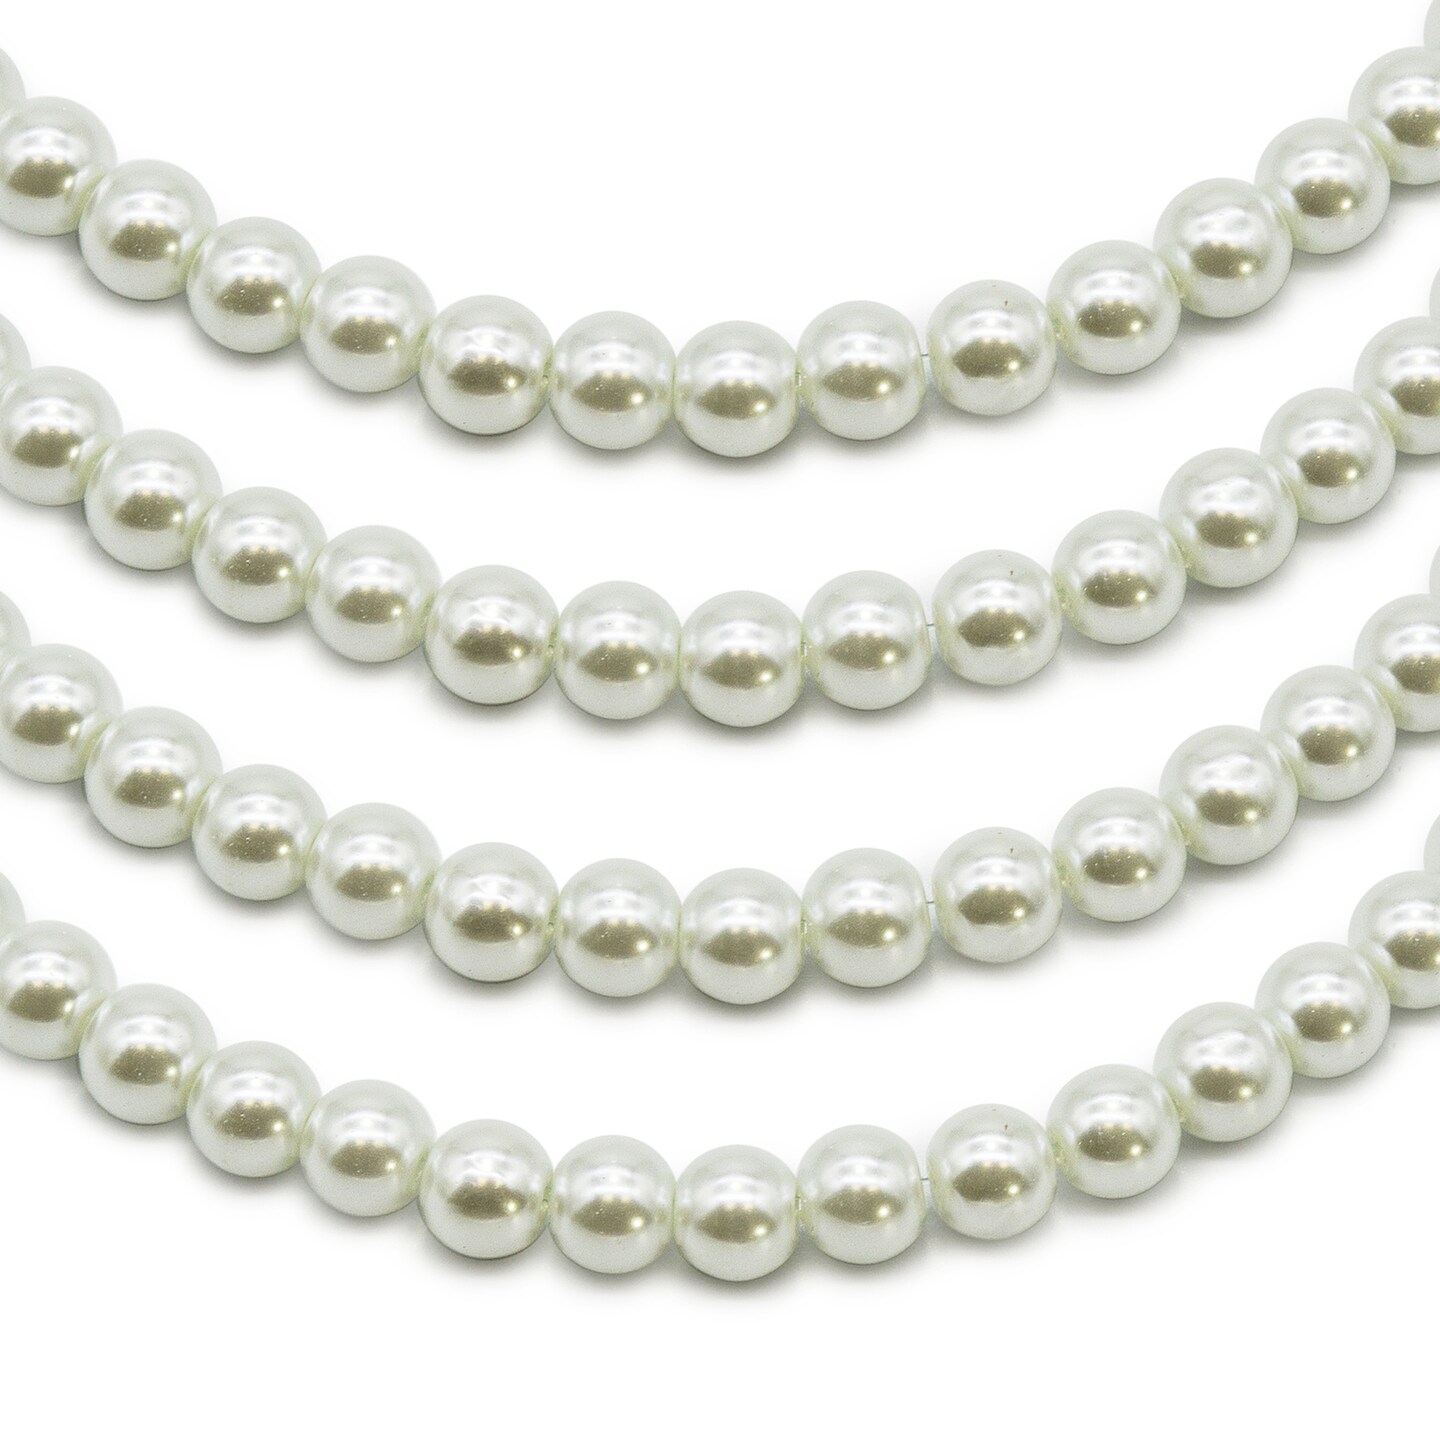 4 Strands of 8mm White Glass Pearl Beads on 30-Inch Strands